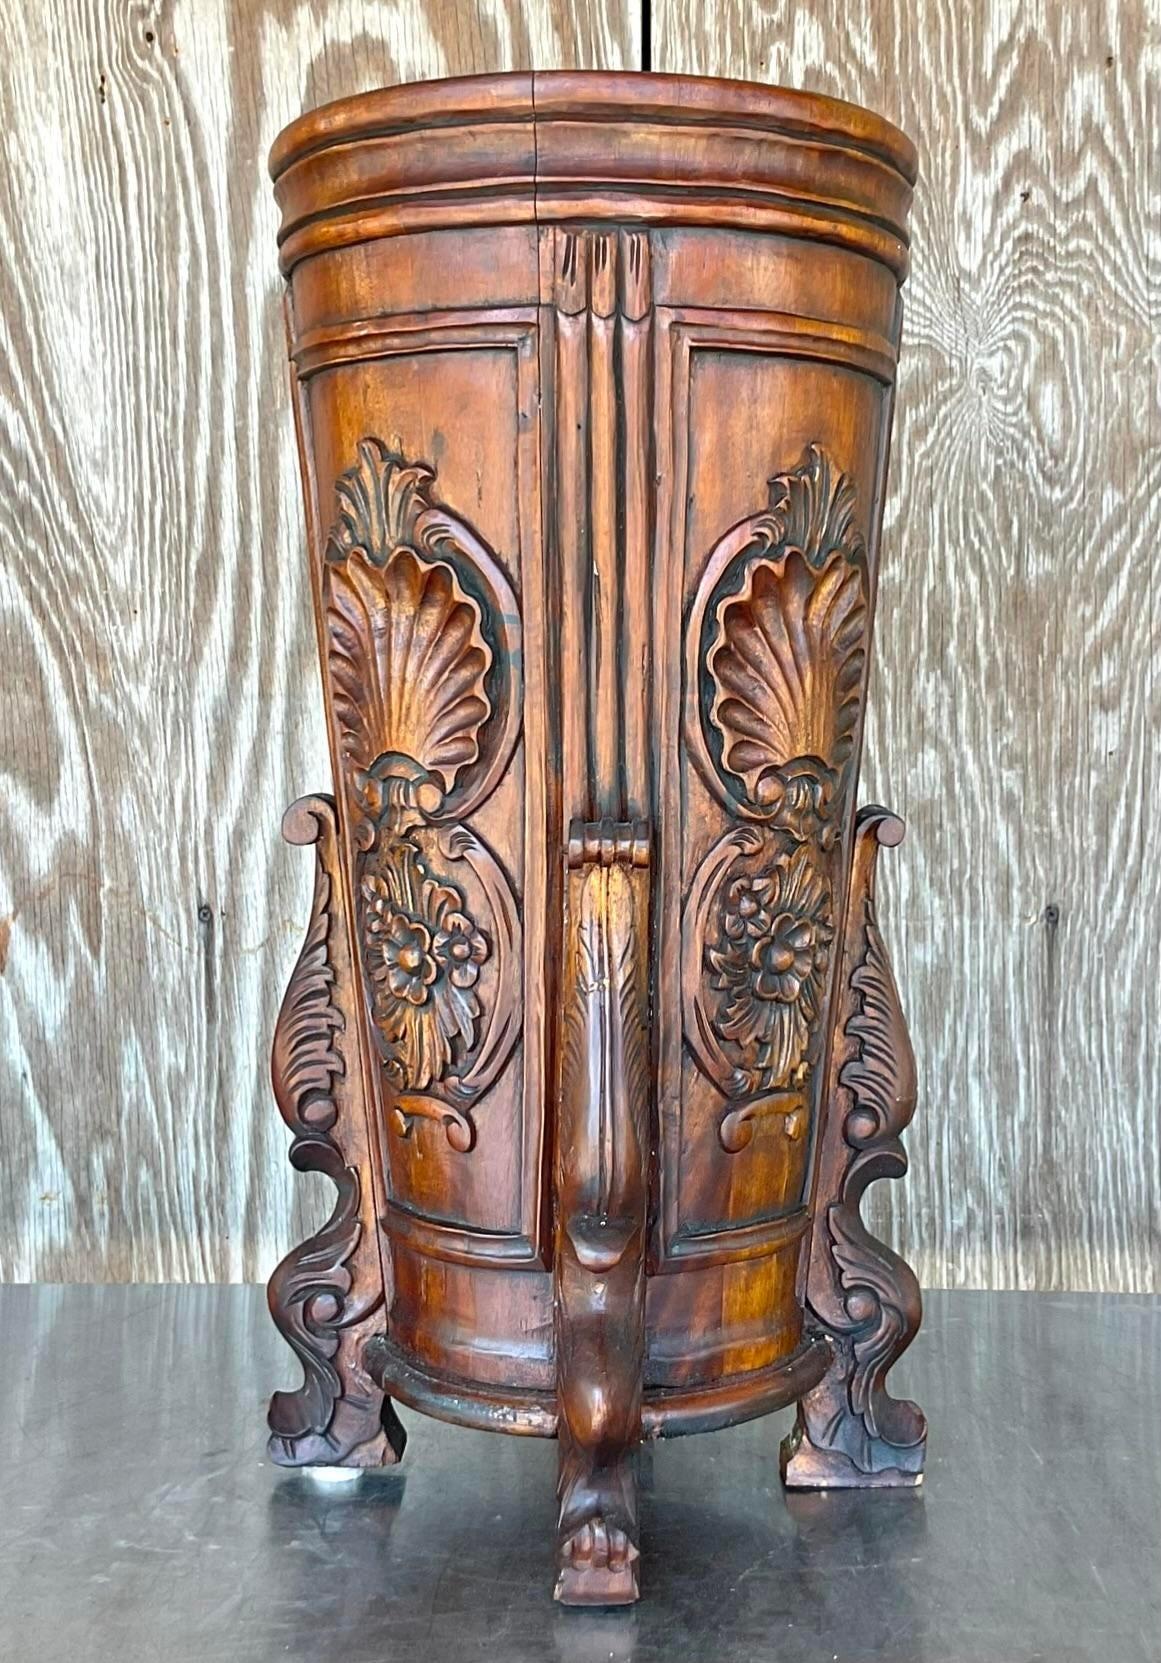 A gorgeous vintage hand carved wooden umbrella stand. The wooden umbrella stand is hand carved with attention to floral detail and it shows. Acquired at a Palm Beach estate.